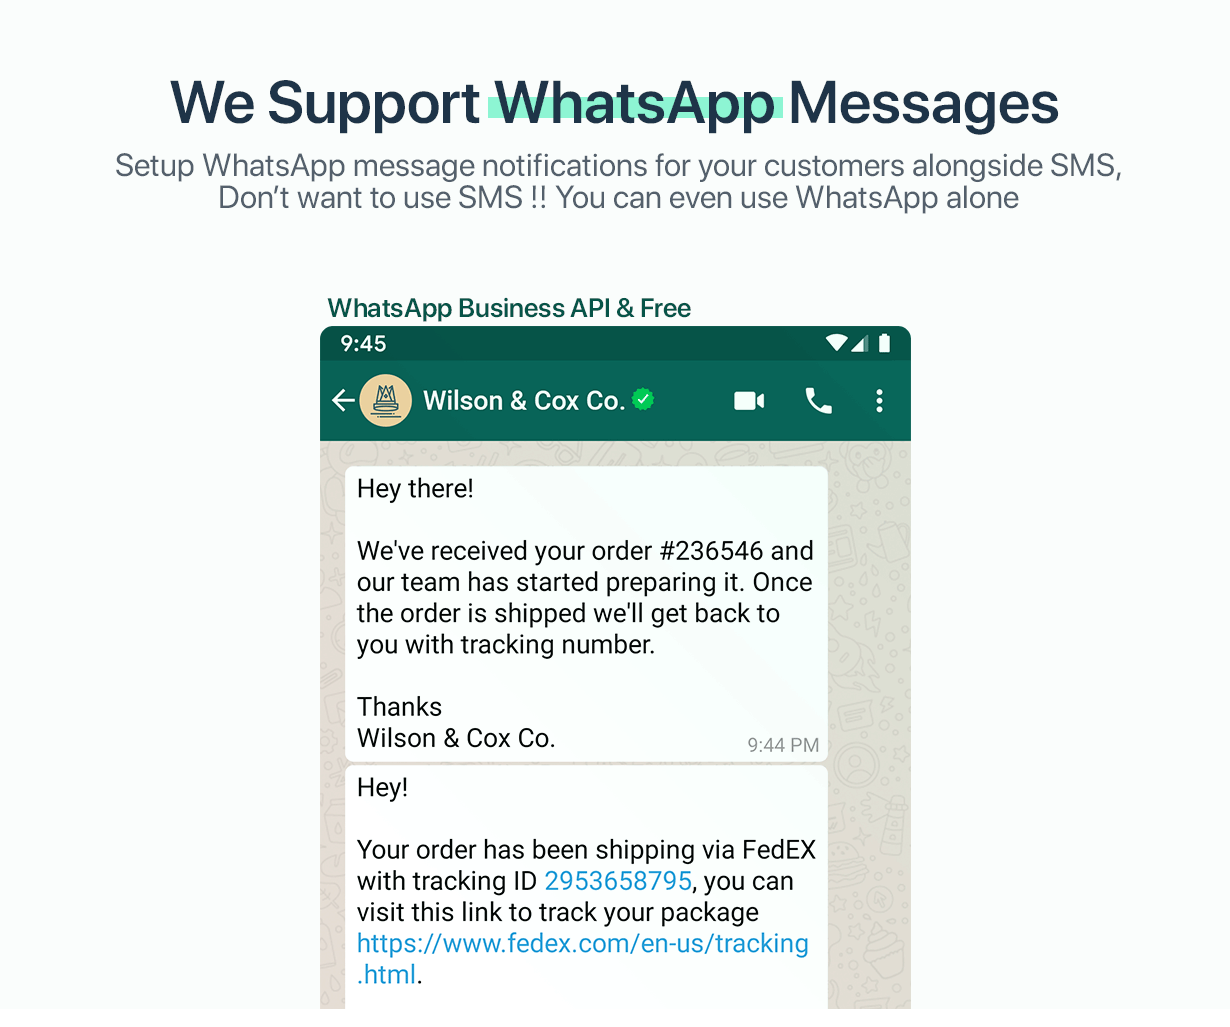 We support WhatsApp Messages